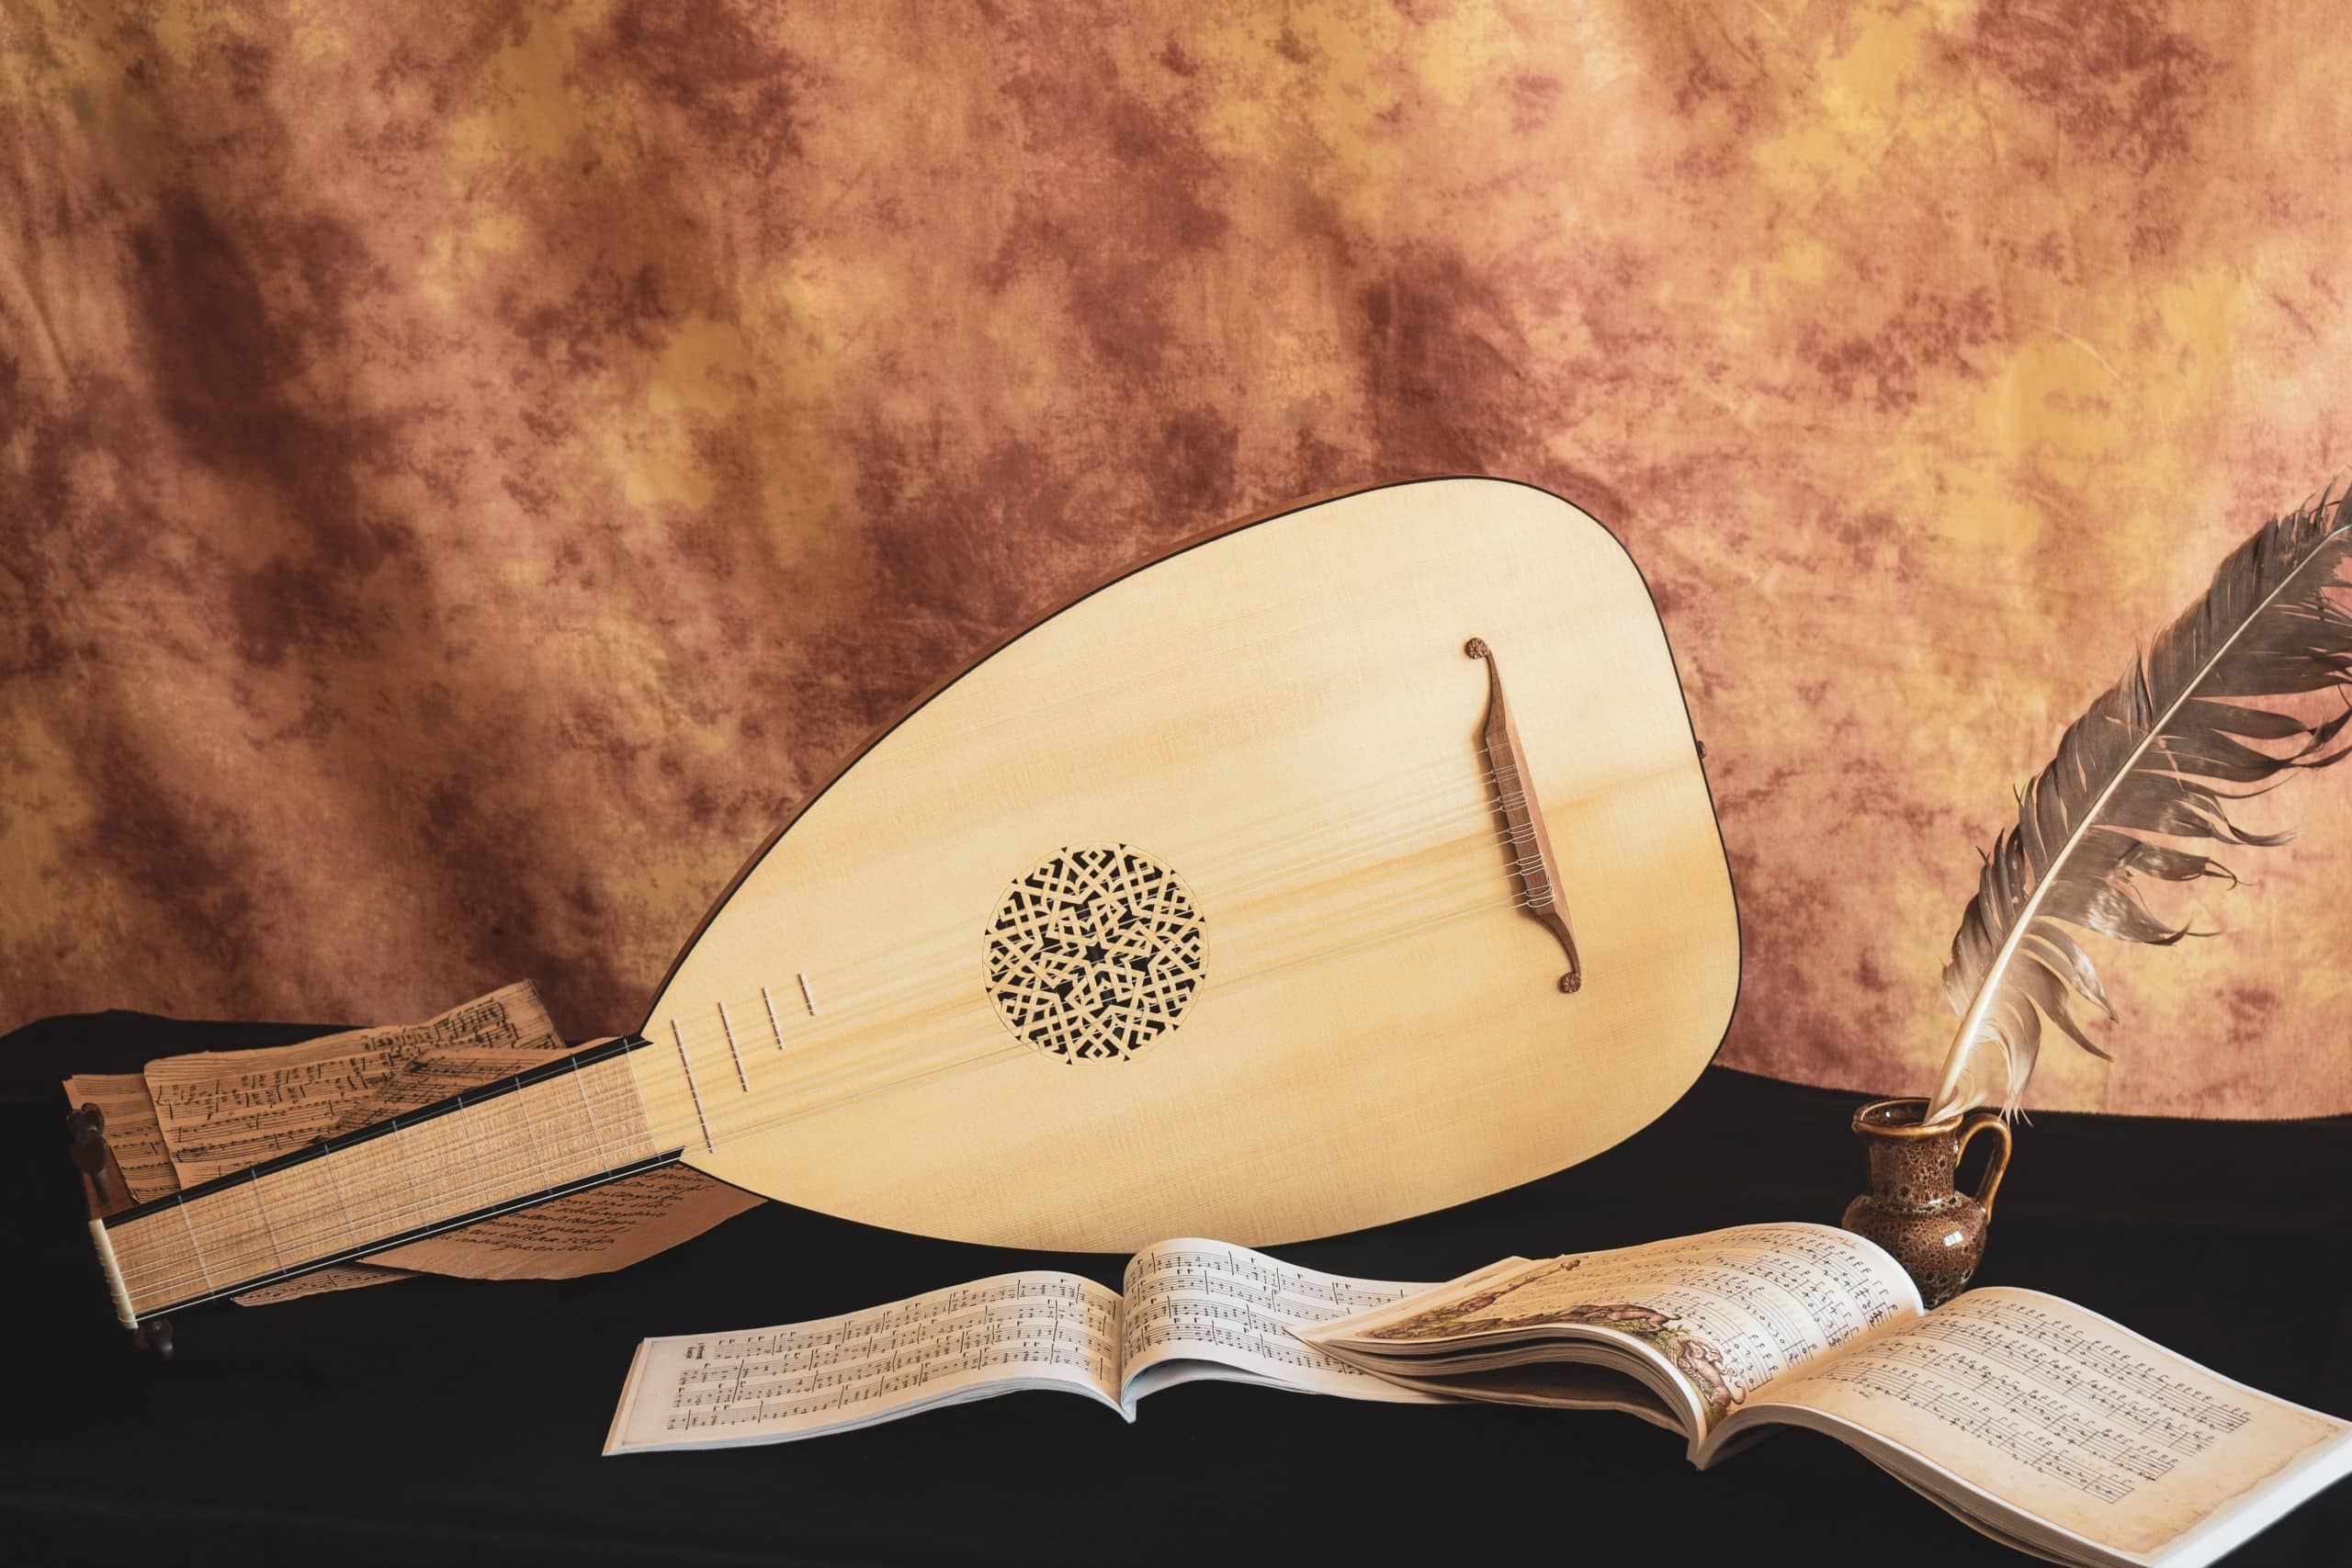 Musical in the Renaissance style with lute.